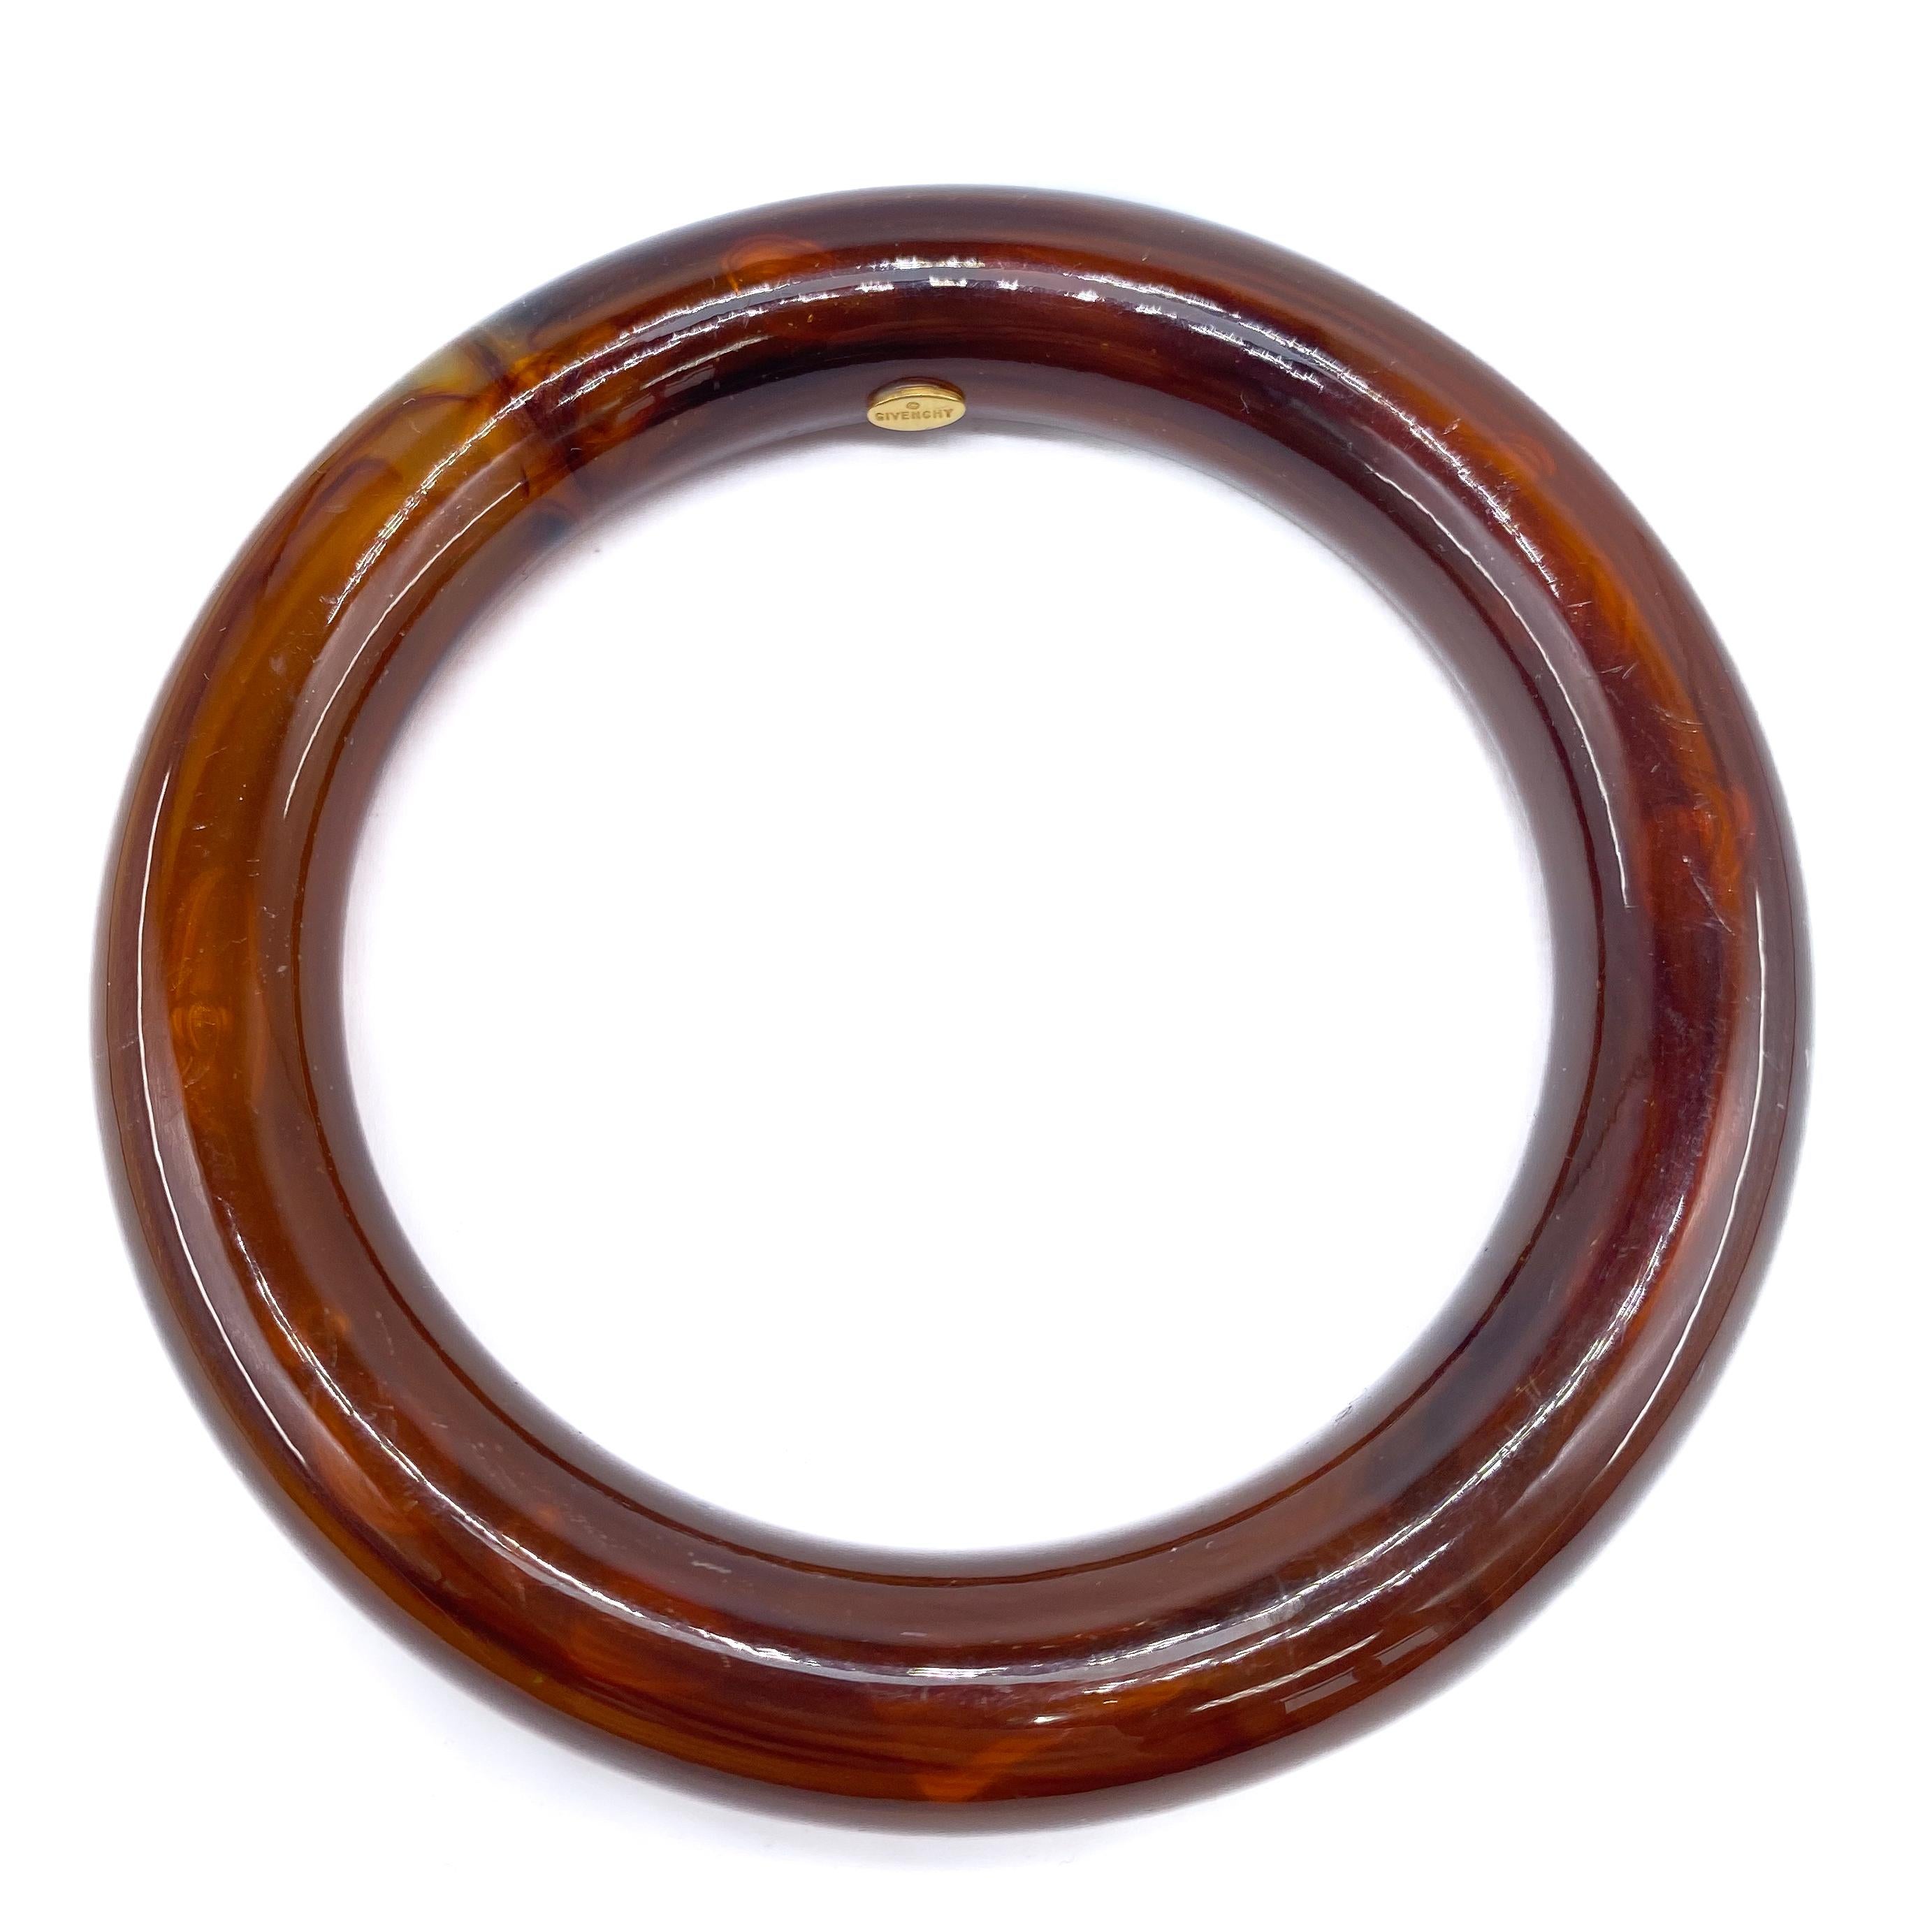 Givenchy Vintage 1980s Bracelet

Timelessly elegant and versatile lucite bangle from the iconic House of Givenchy

Detail
-Crafted from a rich mahogany lucite
-Made in the 1980s

Size & Fit
-Inner circumference 8 inches 
-Slides on and